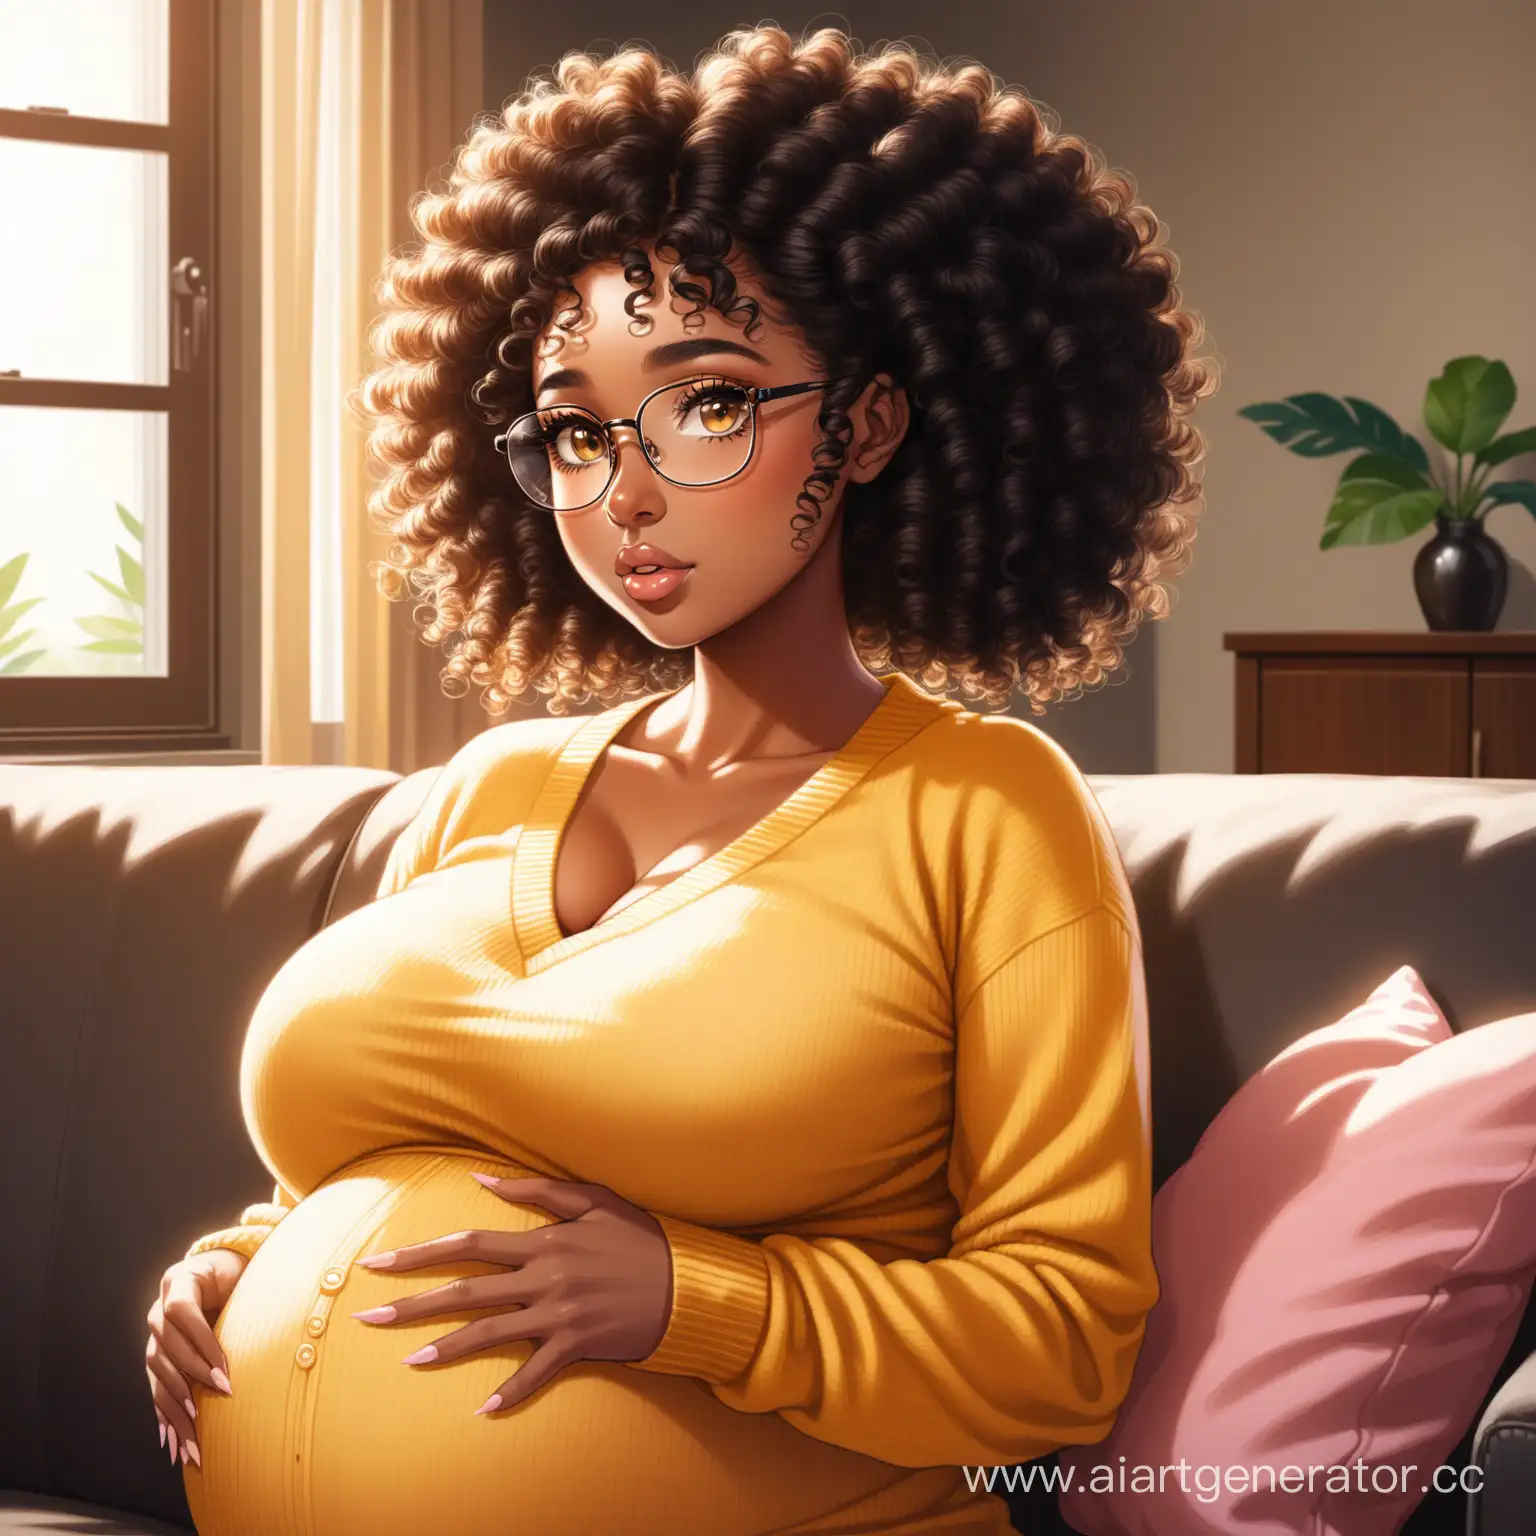 Pregnant-Woman-Relaxing-in-Cozy-Living-Room-with-Afro-Curly-Hair-and-Glasses